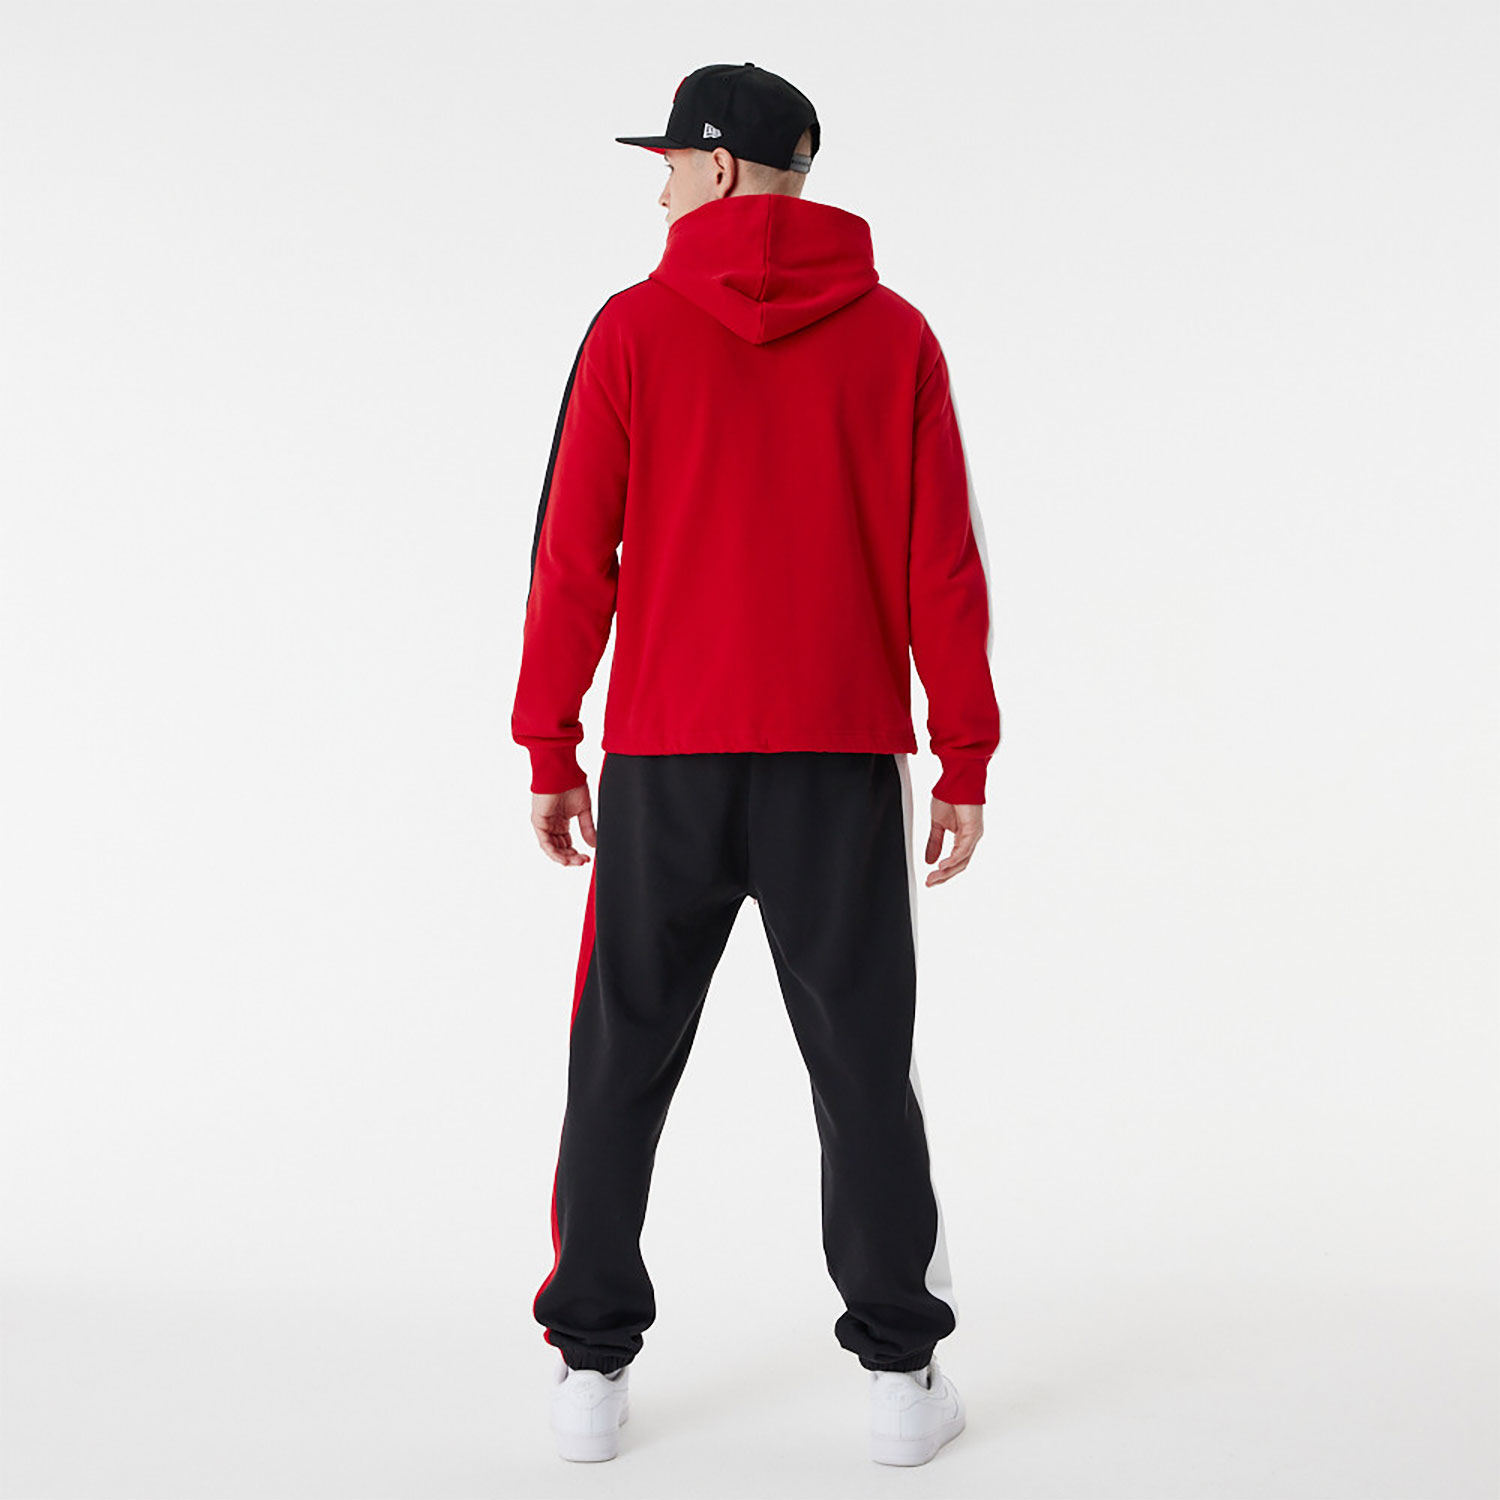 Chicago Bulls NBA Cut and Sew Red Oversized Hoodie